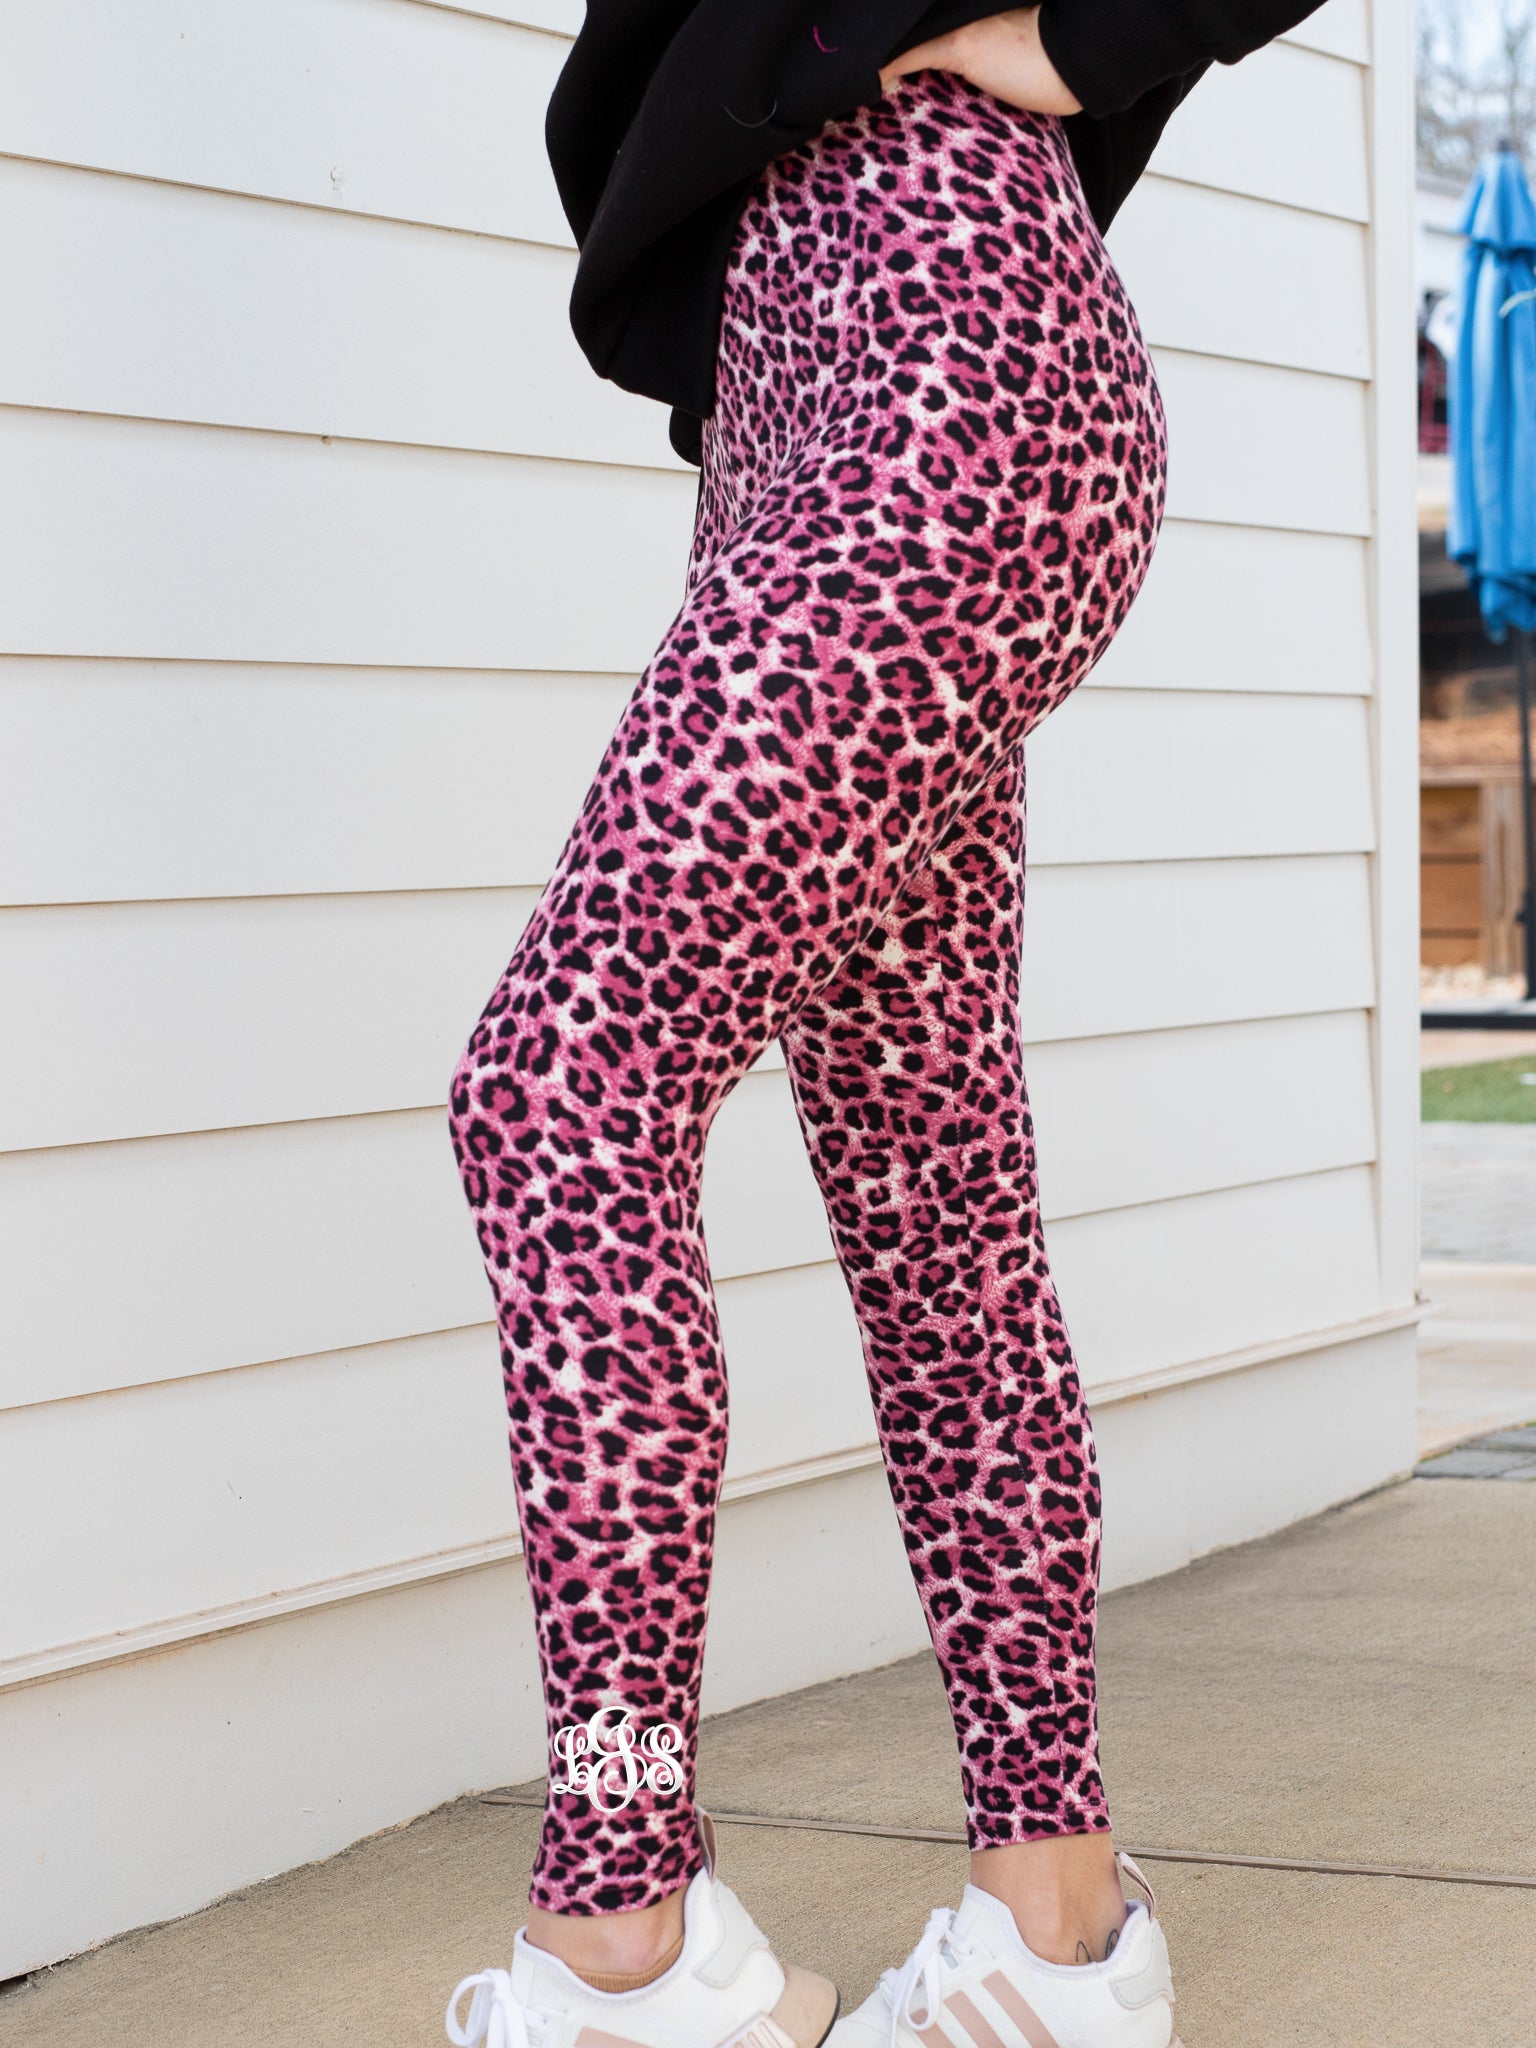 Wild Leopard Leggings - Pink – Initial Outfitters